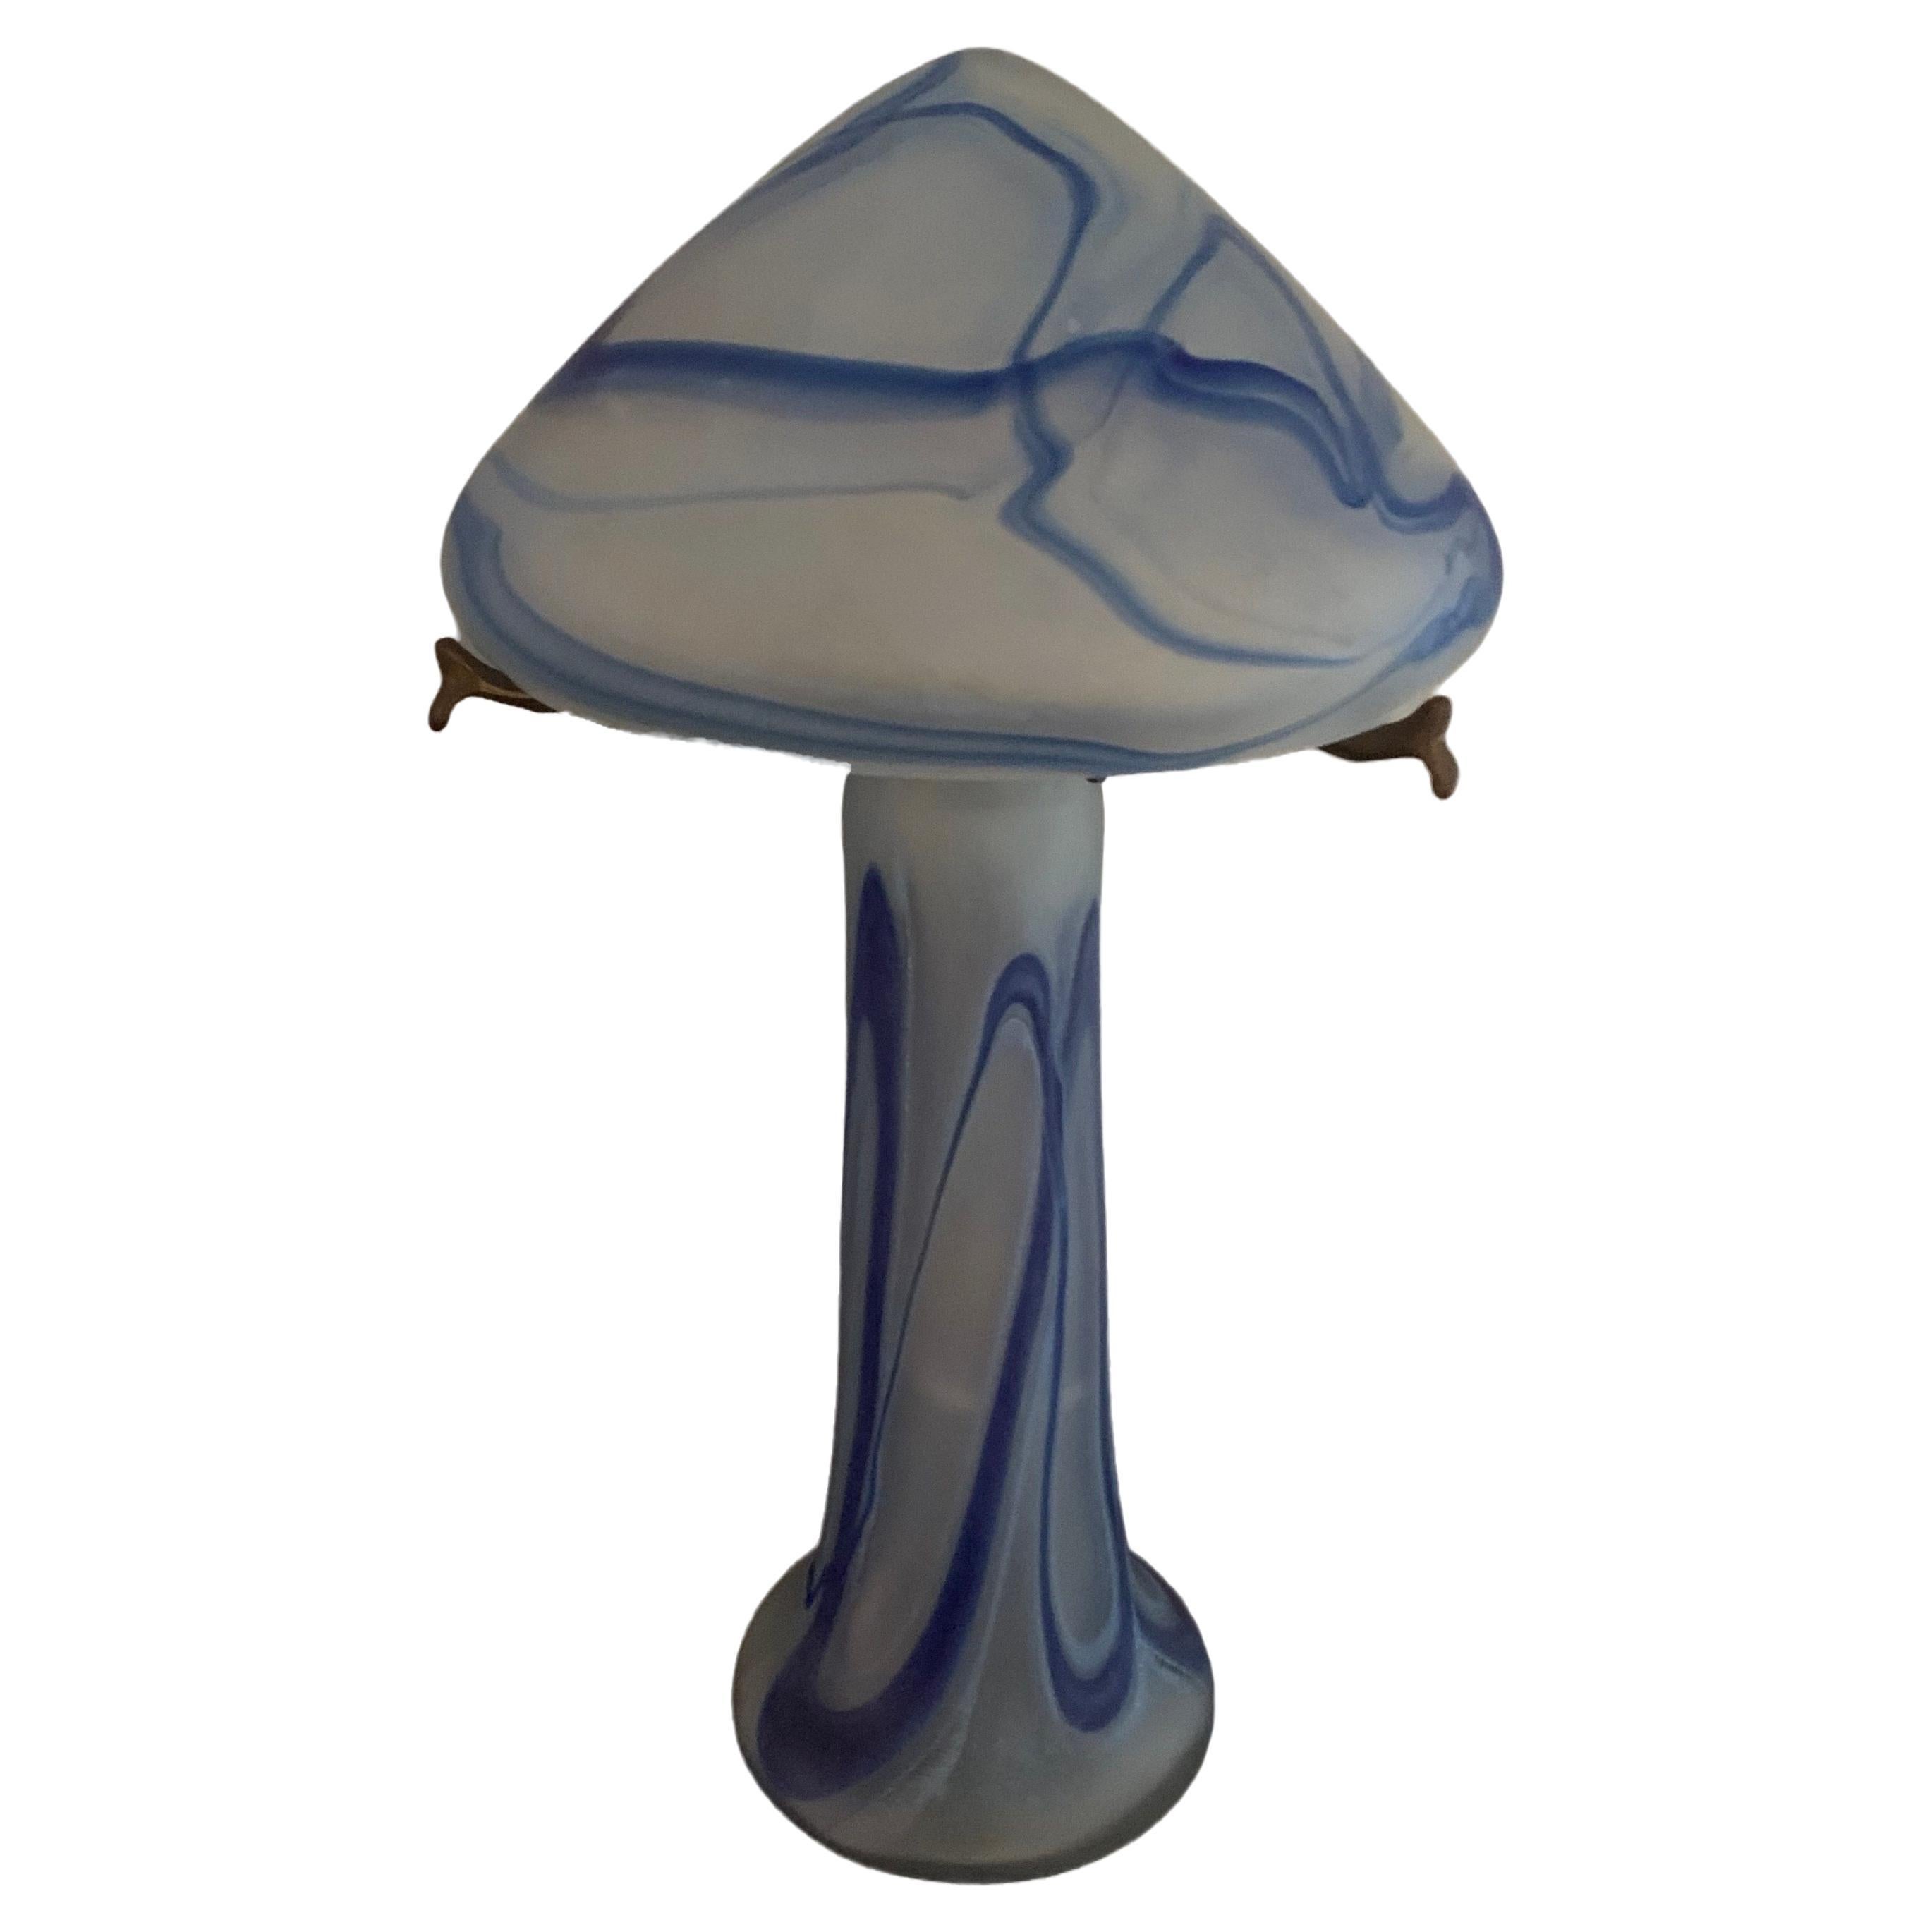 Exquisite Art Nouveau lamp made in France. 

Traditional mushroom shape with a pointed dome. Glass base and the two pieces all come together with a brass stem that attaches to the base. 

Blue, white and clear glass. 

Circa 1900s. 

There is a